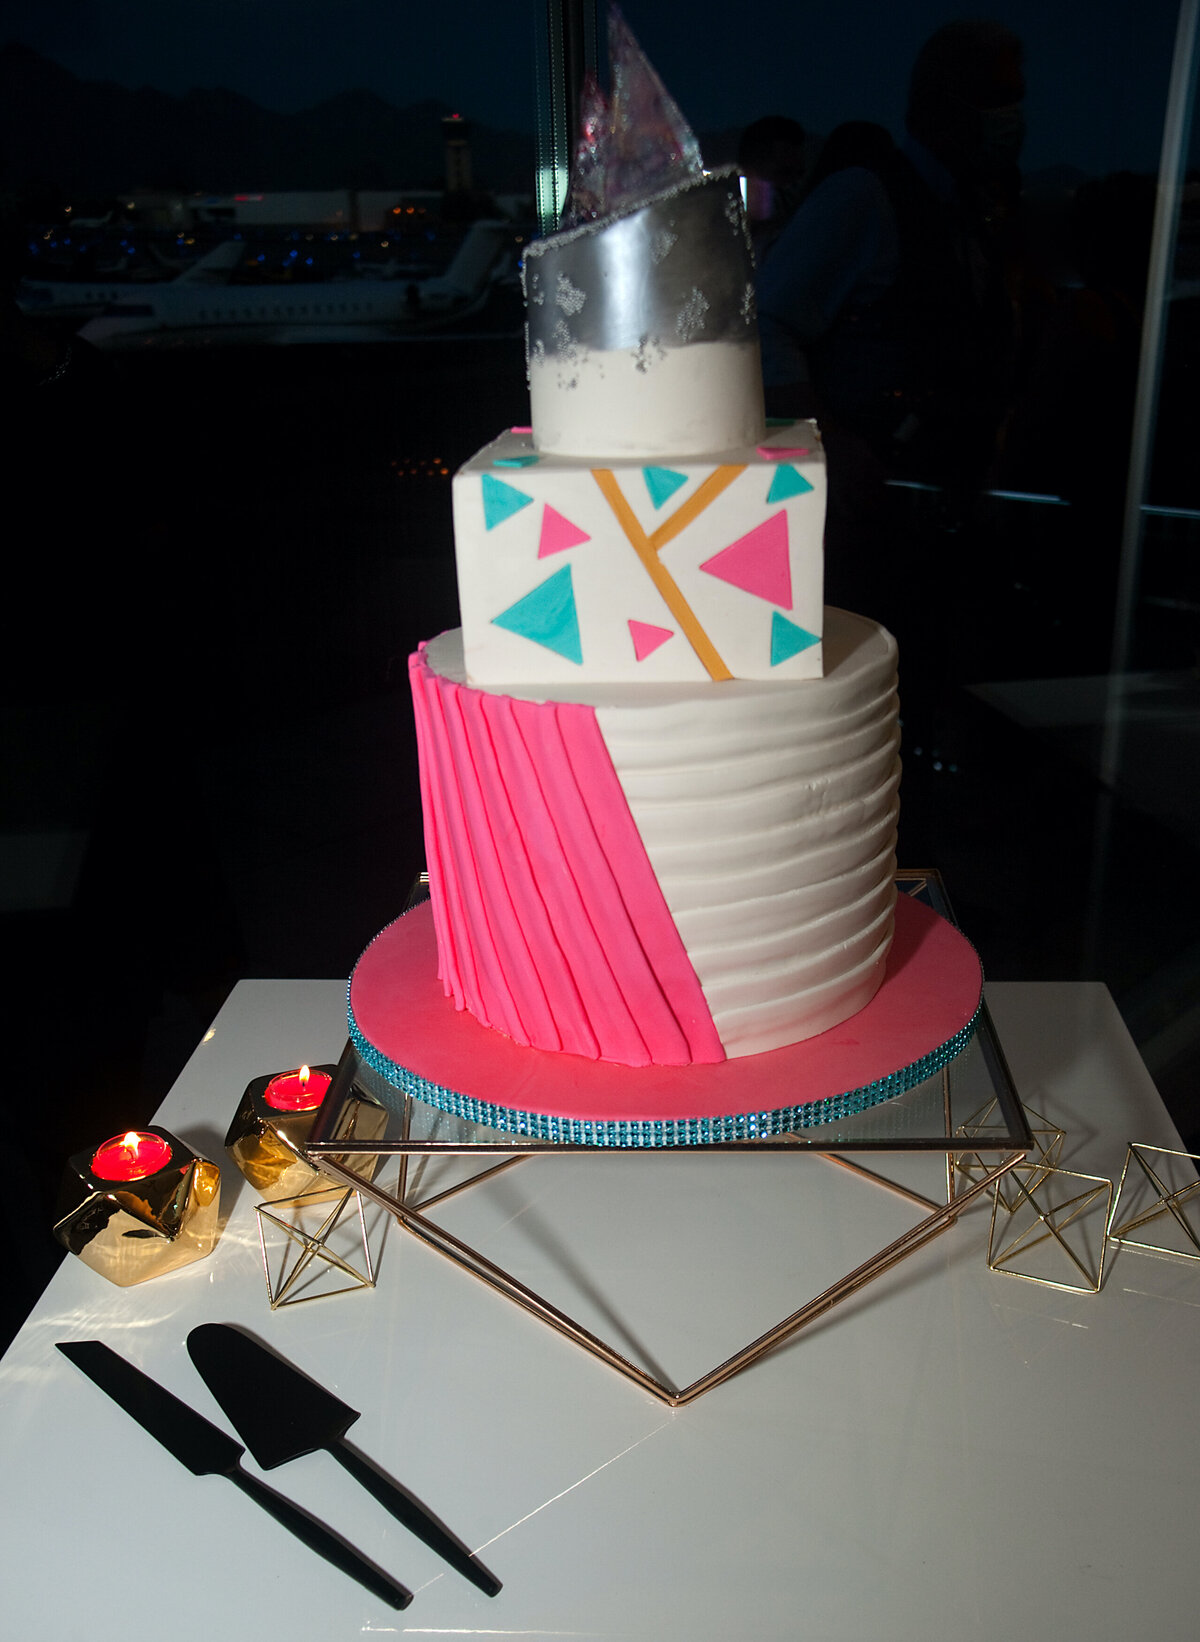 Geometric 3 tier wedding cake - tall round bottom tier with hot pink and white pleats; square middle tier with teal , gold, pink triangle accents; white and silver top tier carved at an angle and embellished with poured sugar triangle accents.